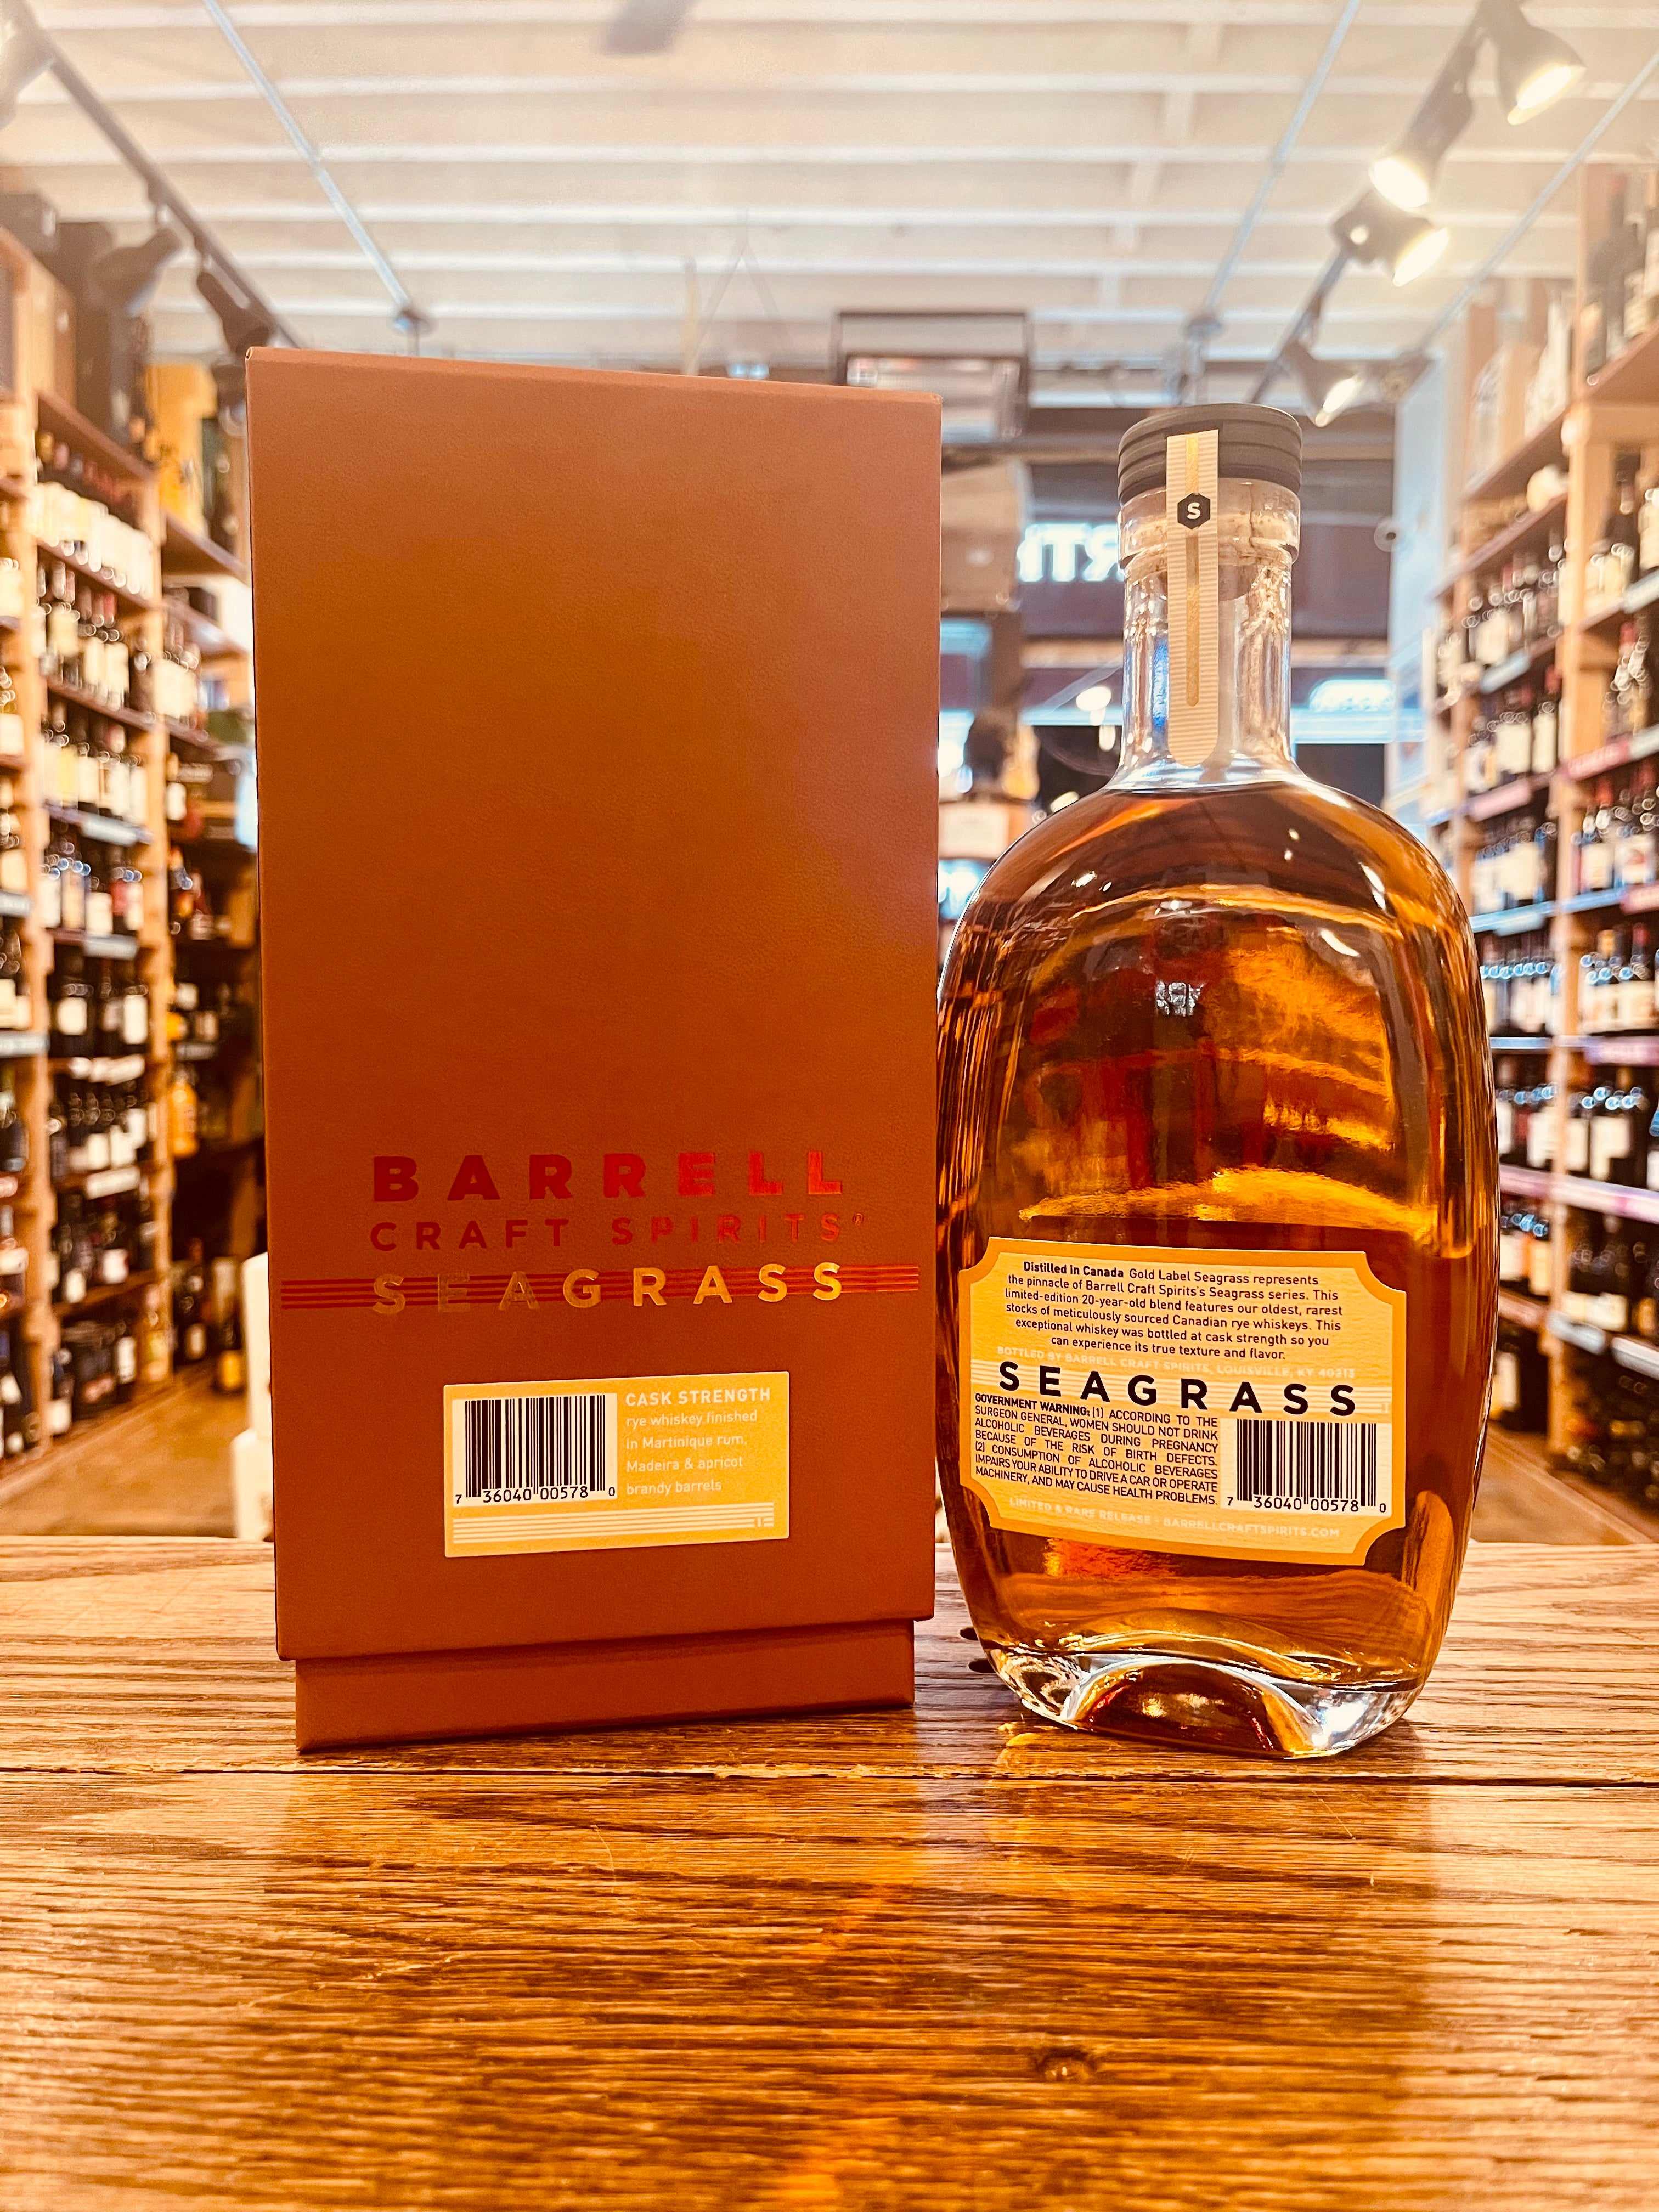 Barrell Craft Spirits Seagrass (Gold Label) 750mL rustic colored box next to an oval shaped bottle with yellow labeling